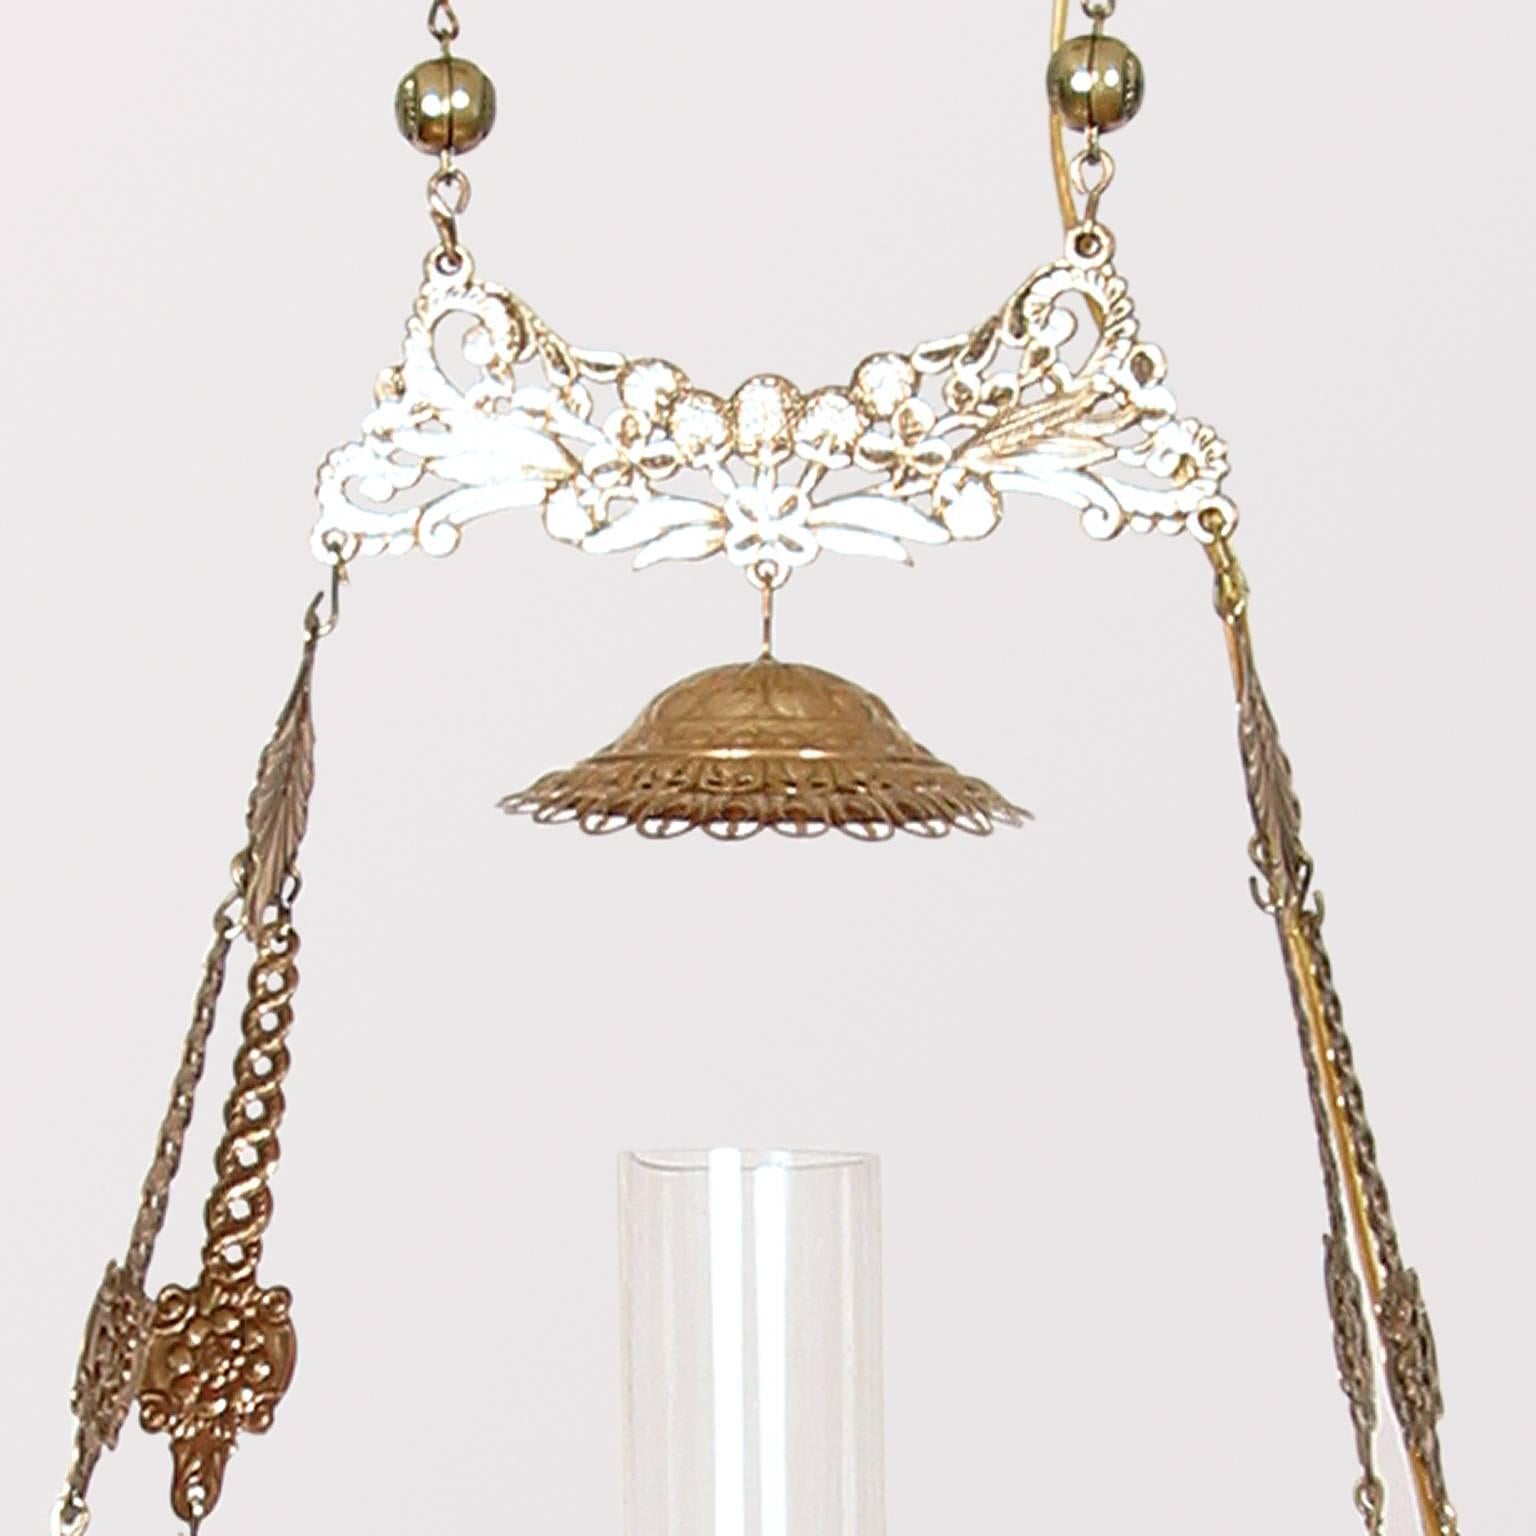 Late 19th Century Victorian Parlor Lamp with Cranbury Hobnail Shade For Sale